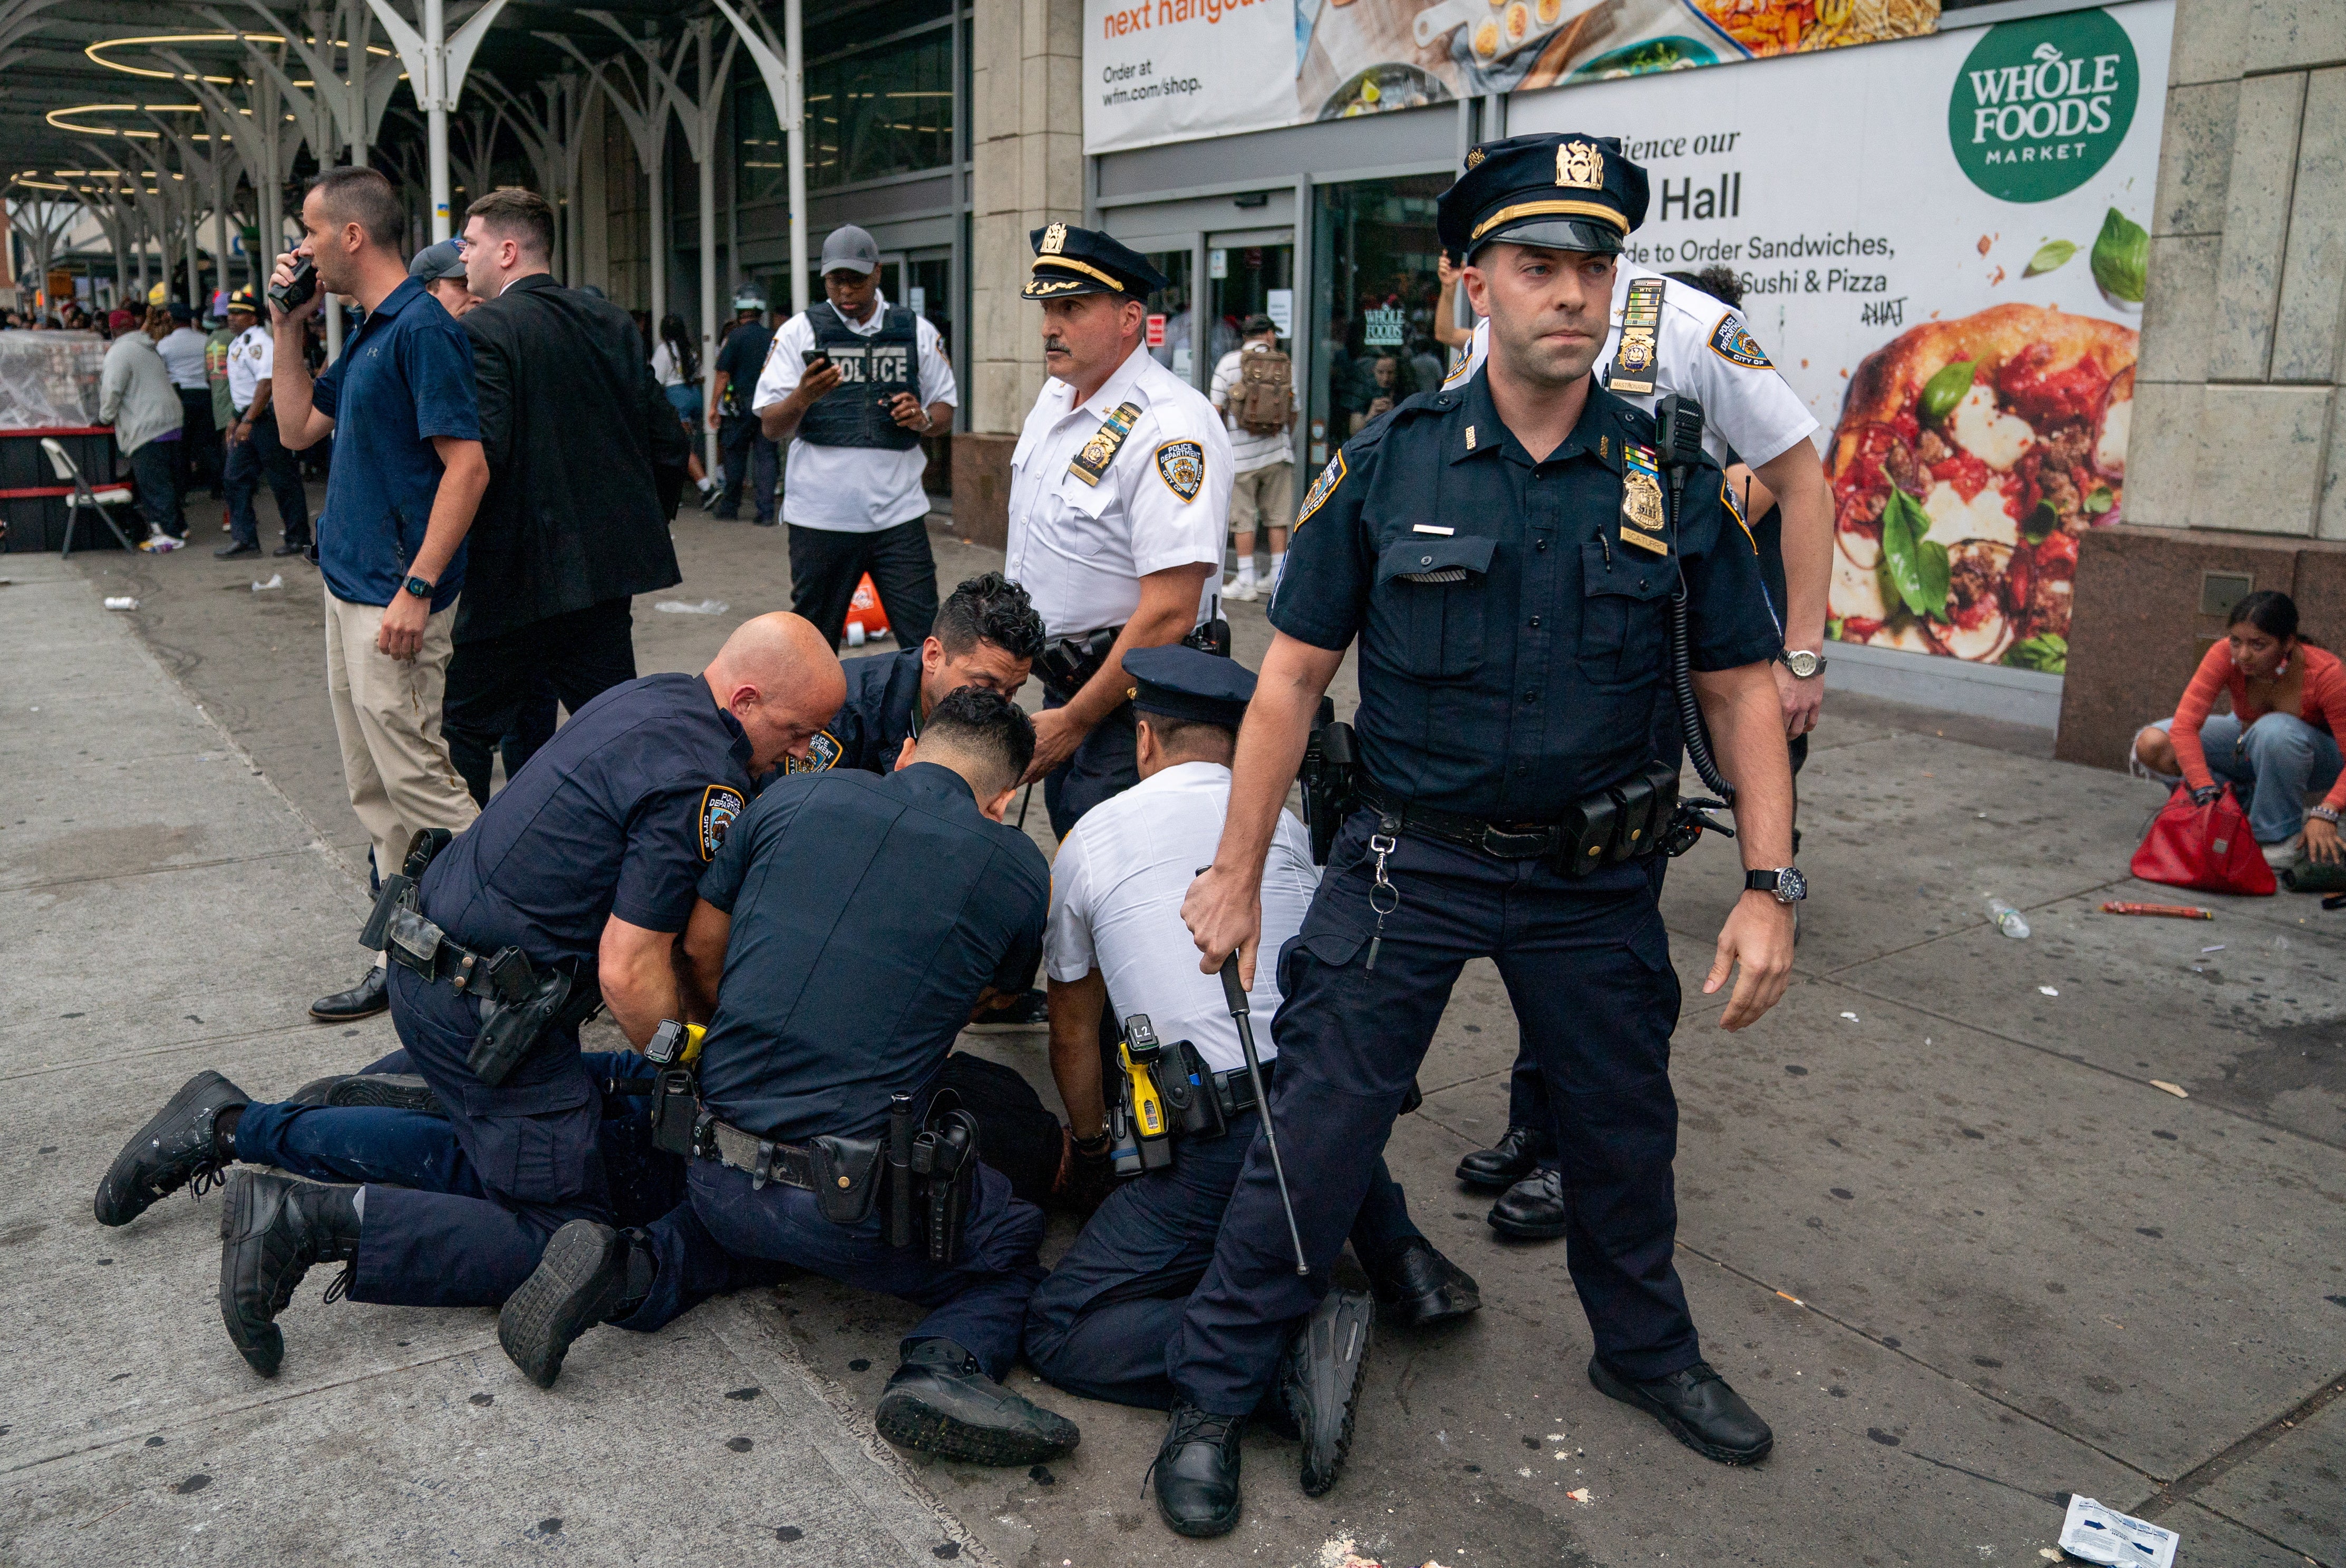 Police arrested dozens of people when the event descended into chaos